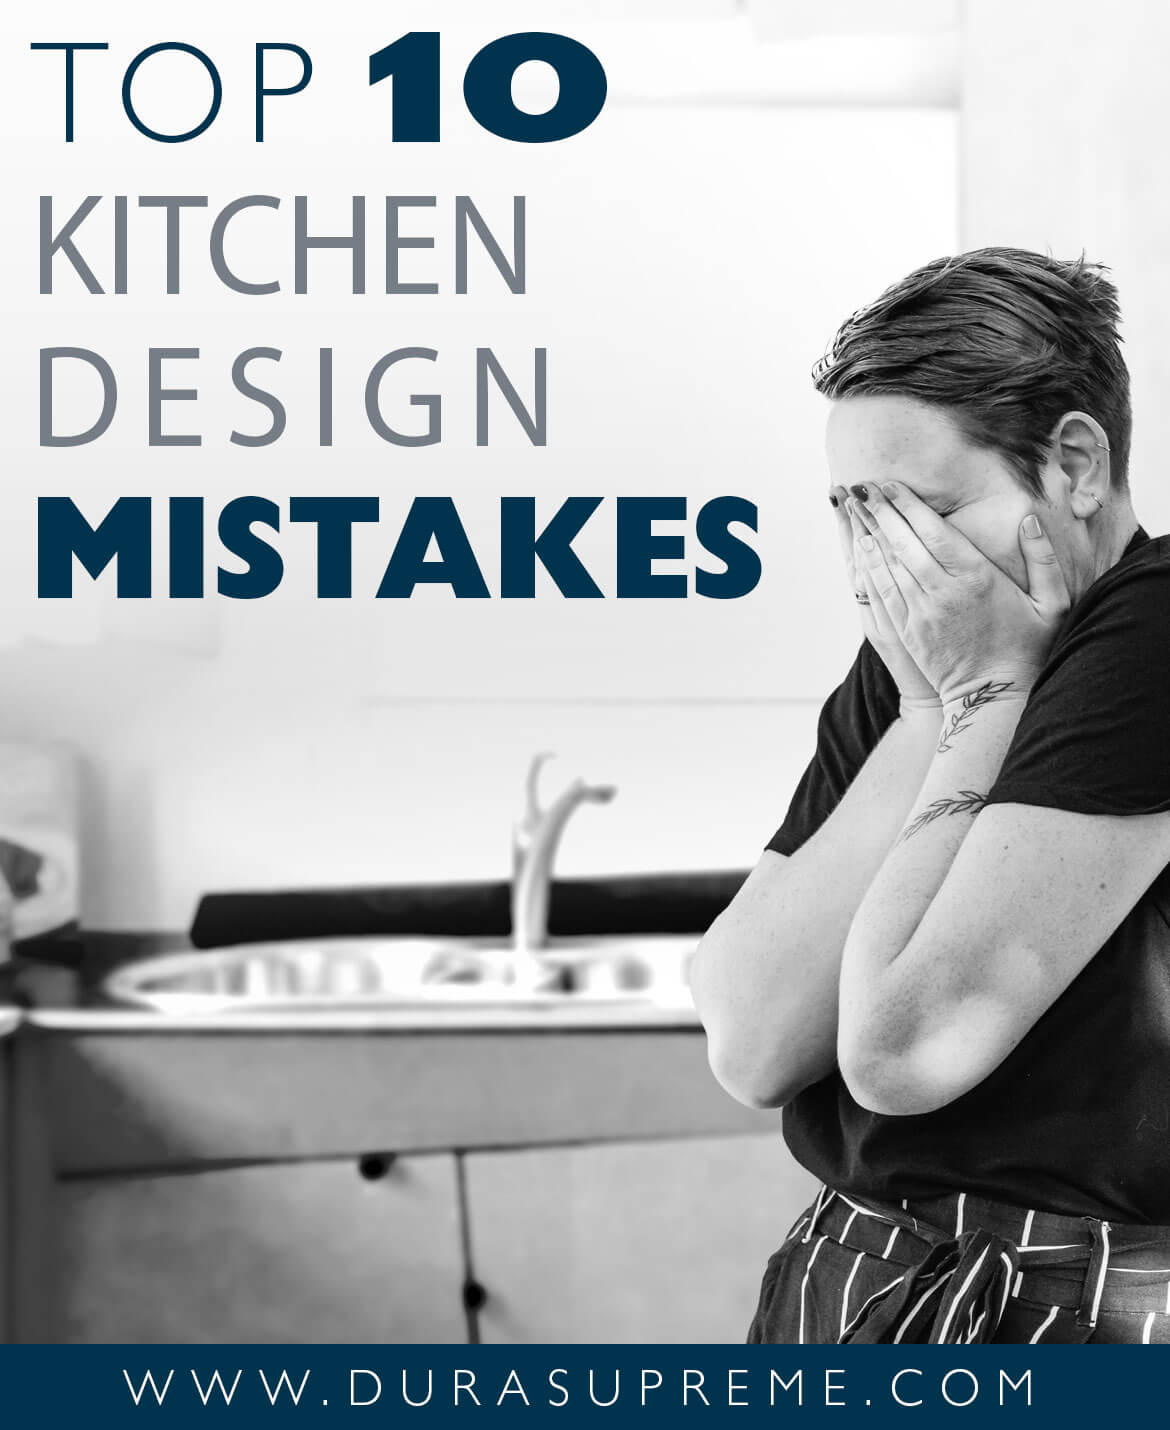 Top 10 Kitchen Design Mistakes and how to avoid them. This woman is upset when she realized there were several design mistakes in her newly remodeled kitchen.